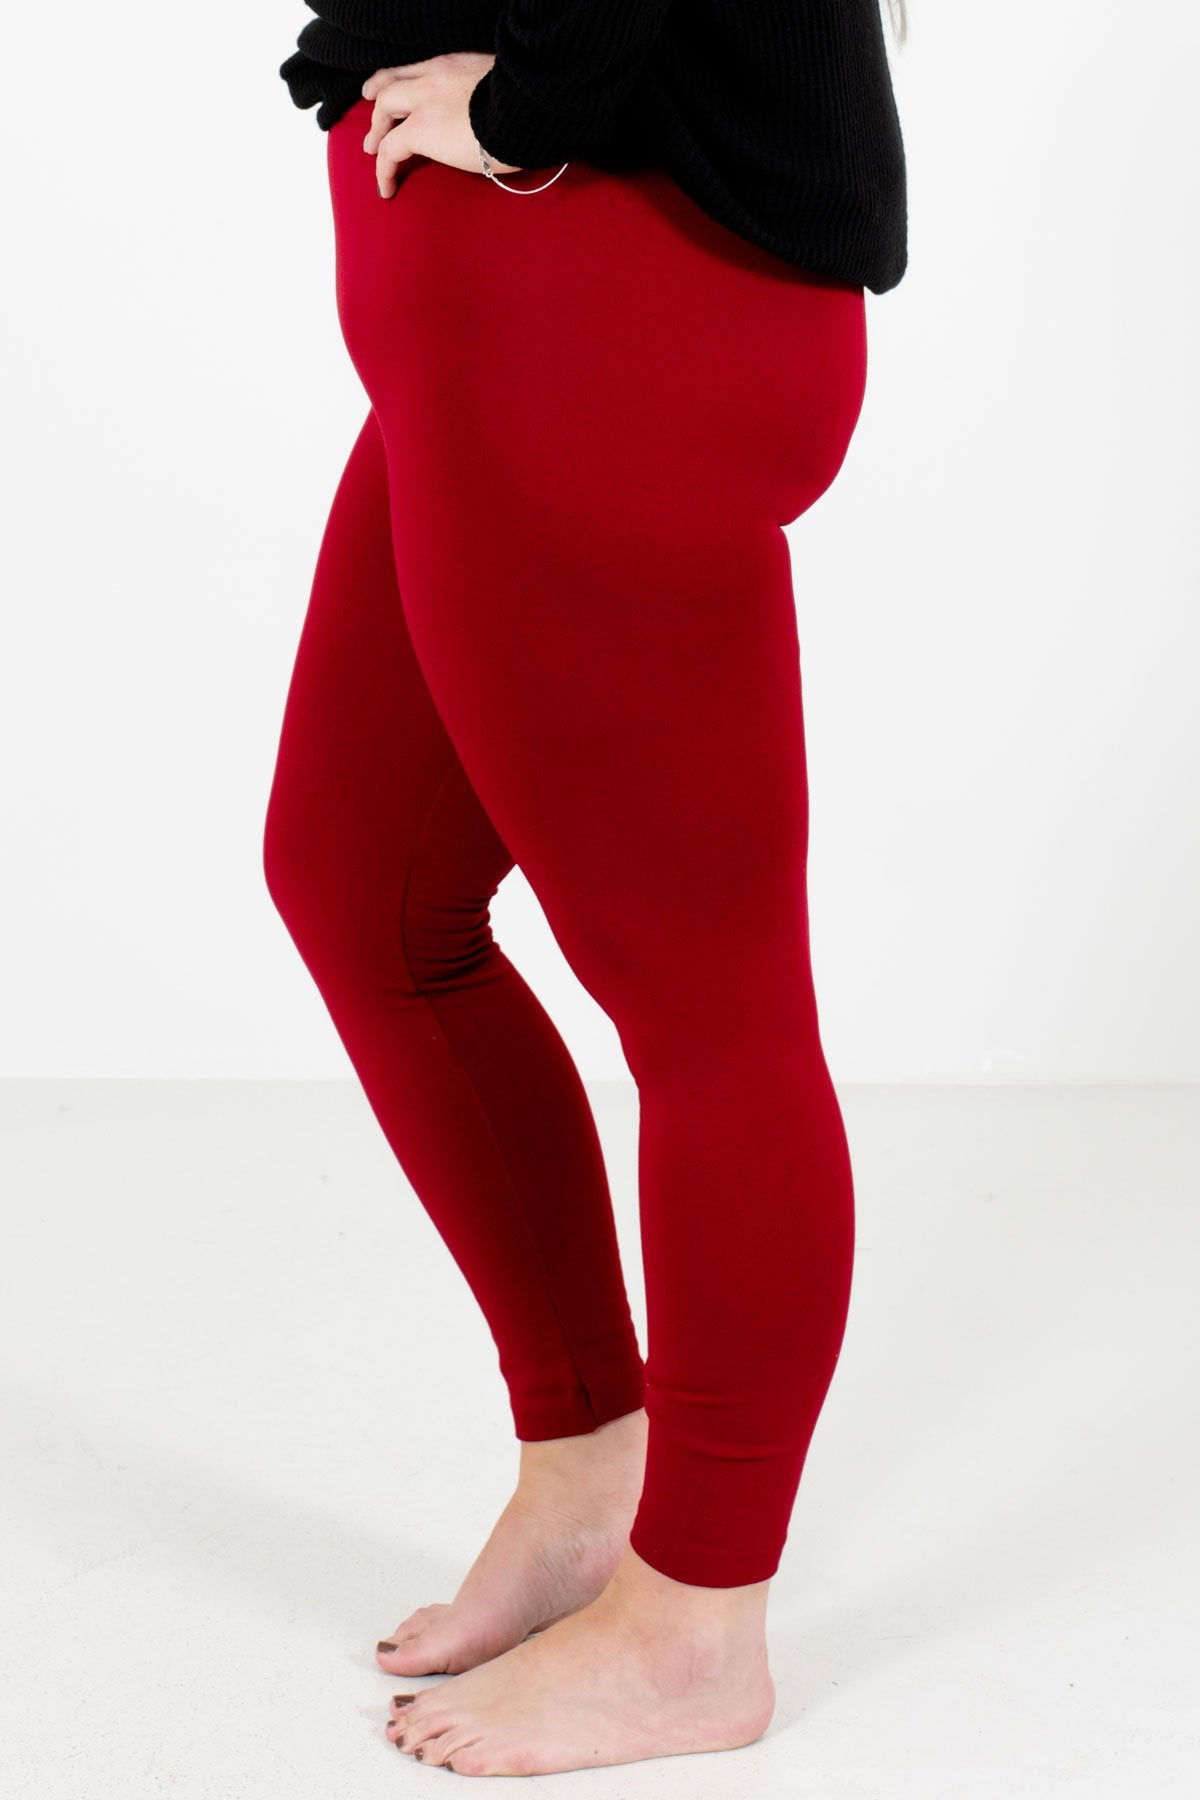 Plus Size Solid Soft Knit Leggings - Red